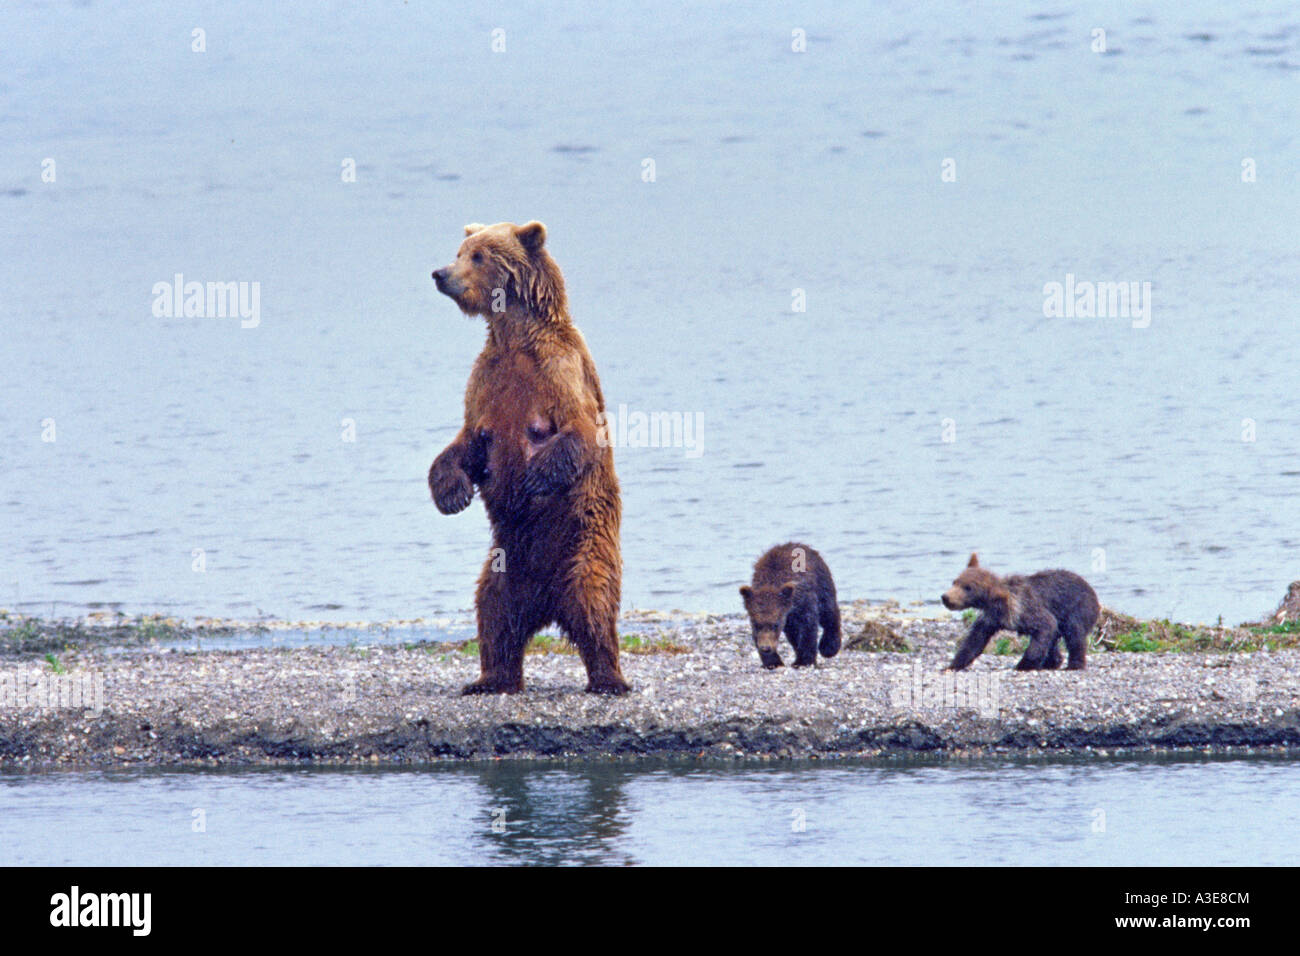 Brown Grizzly Bear mother with cubs standing on hind legs to cheack for danger Ursus arctos horribilis Katmai National Park Alaska Stock Photo